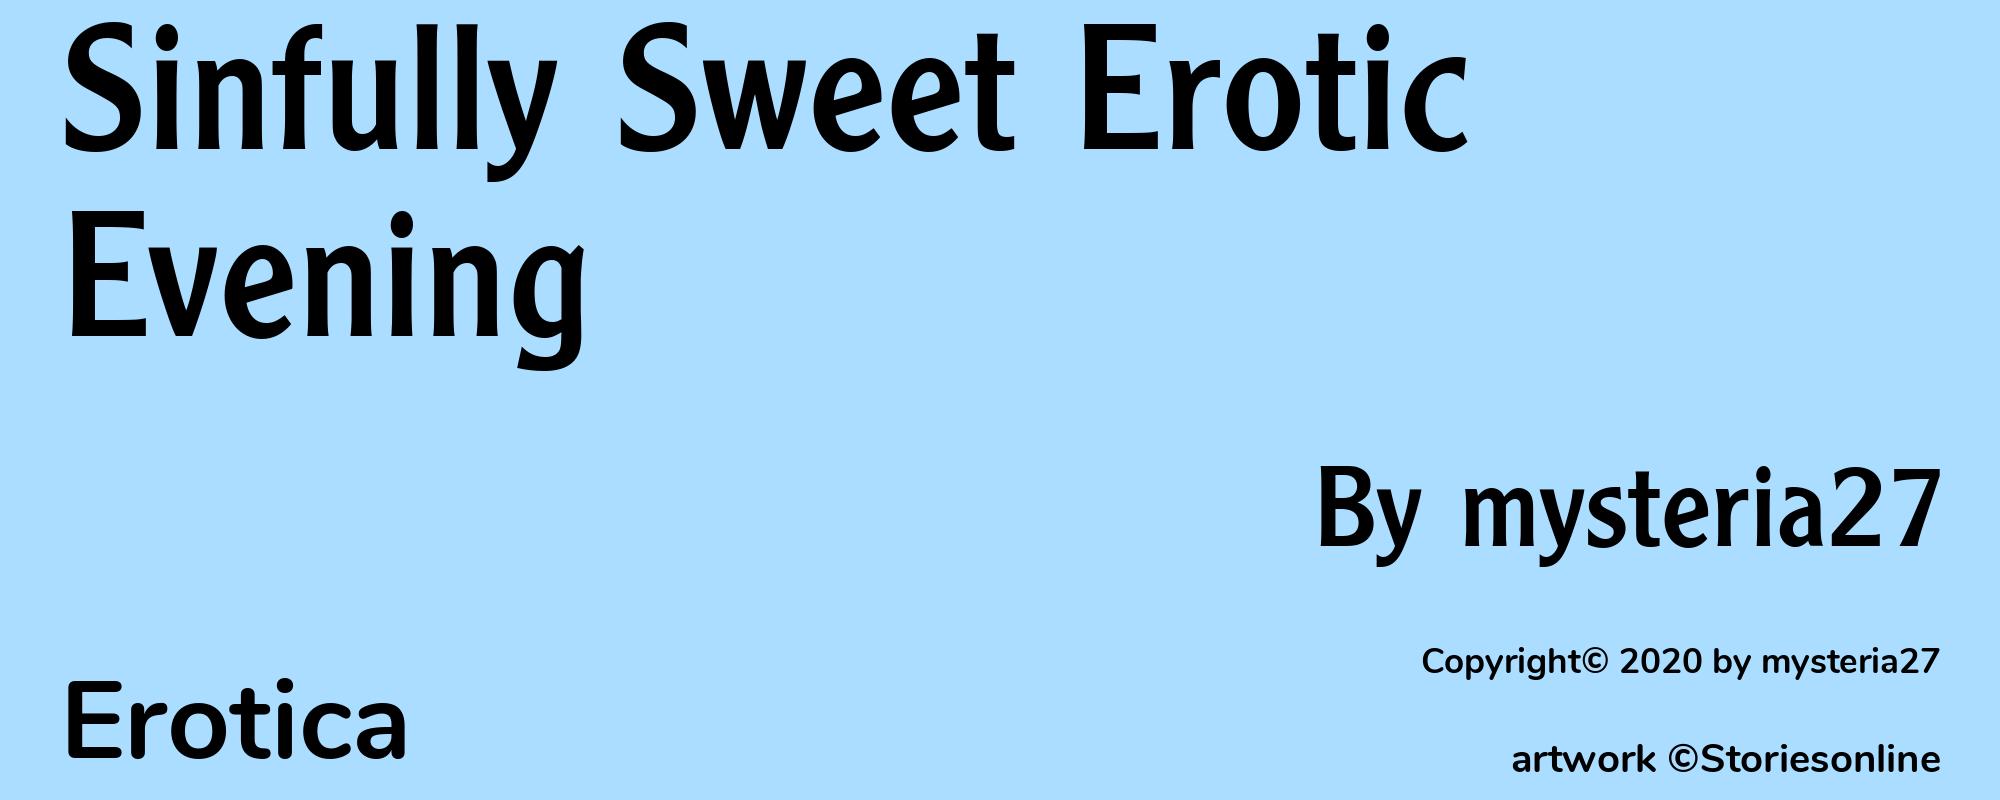 Sinfully Sweet Erotic Evening - Cover